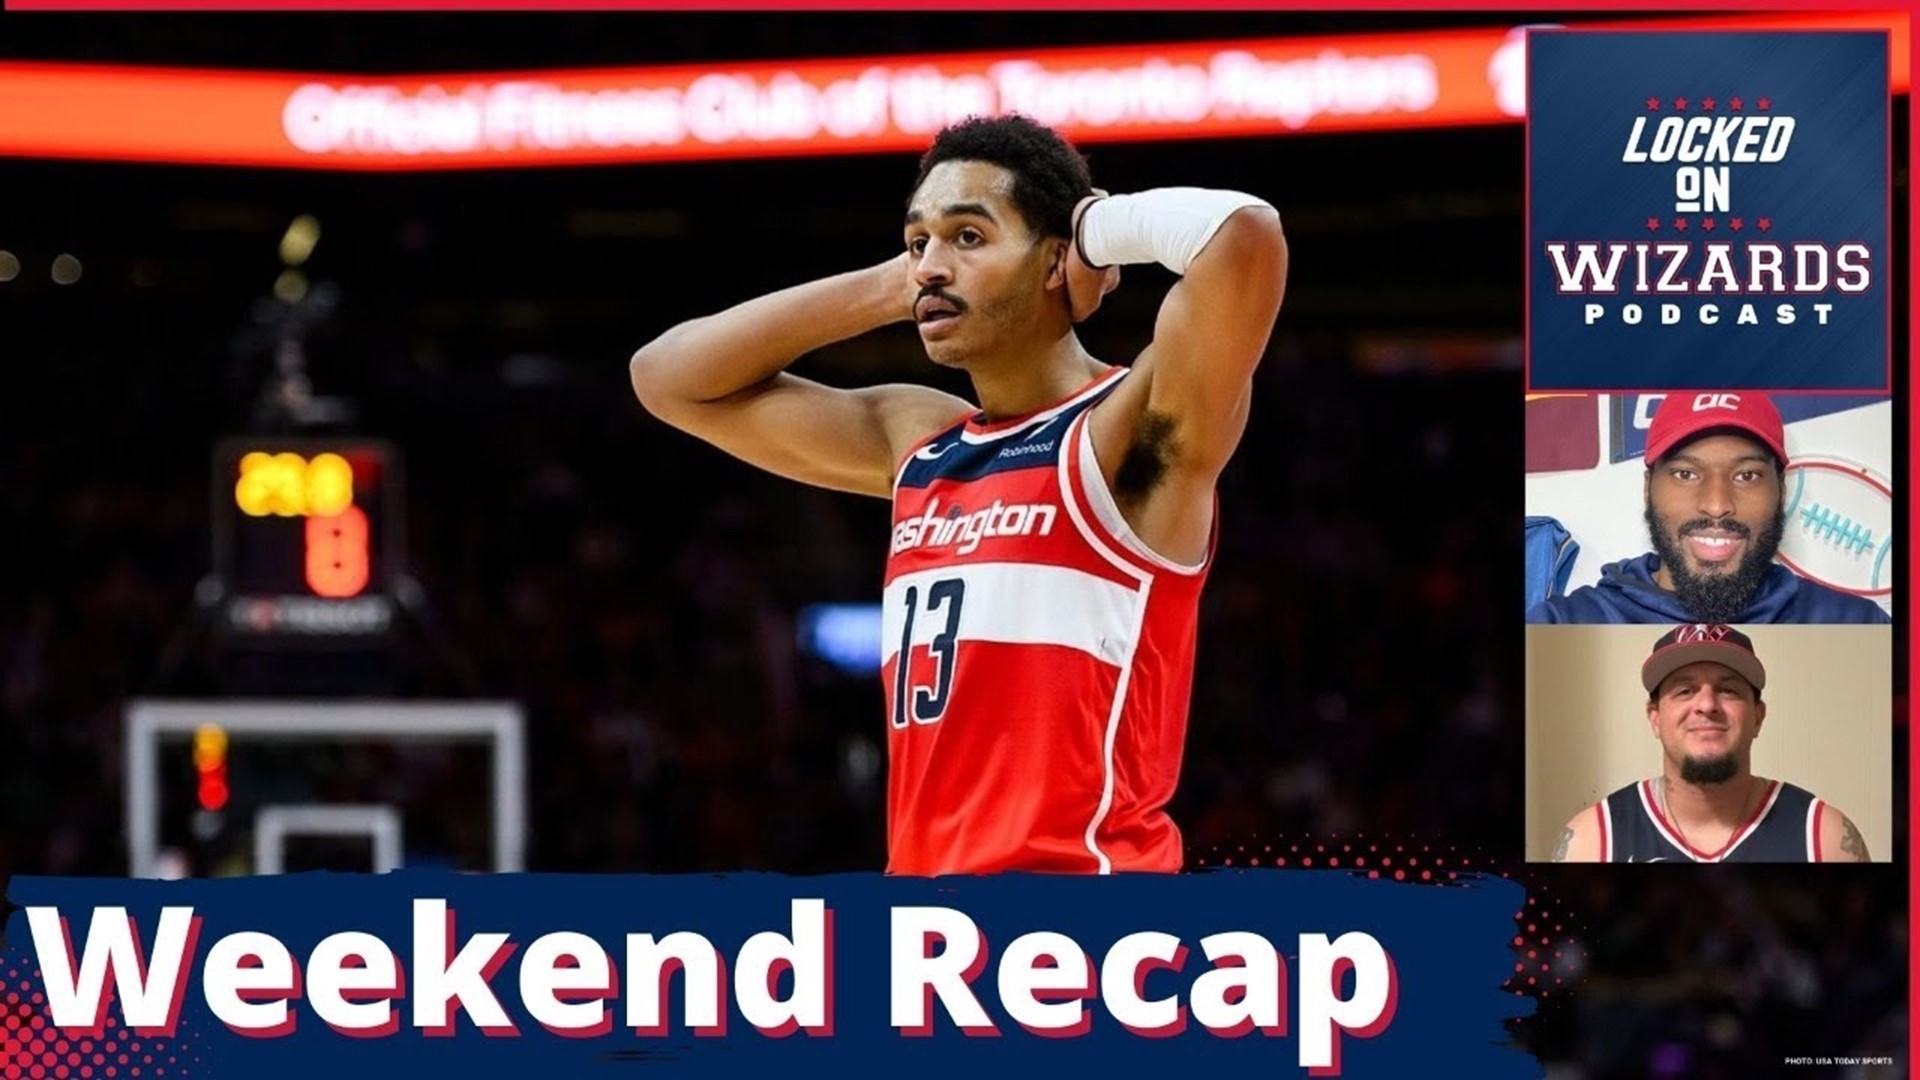 Ed and Brandon recap the Wizards weekend.